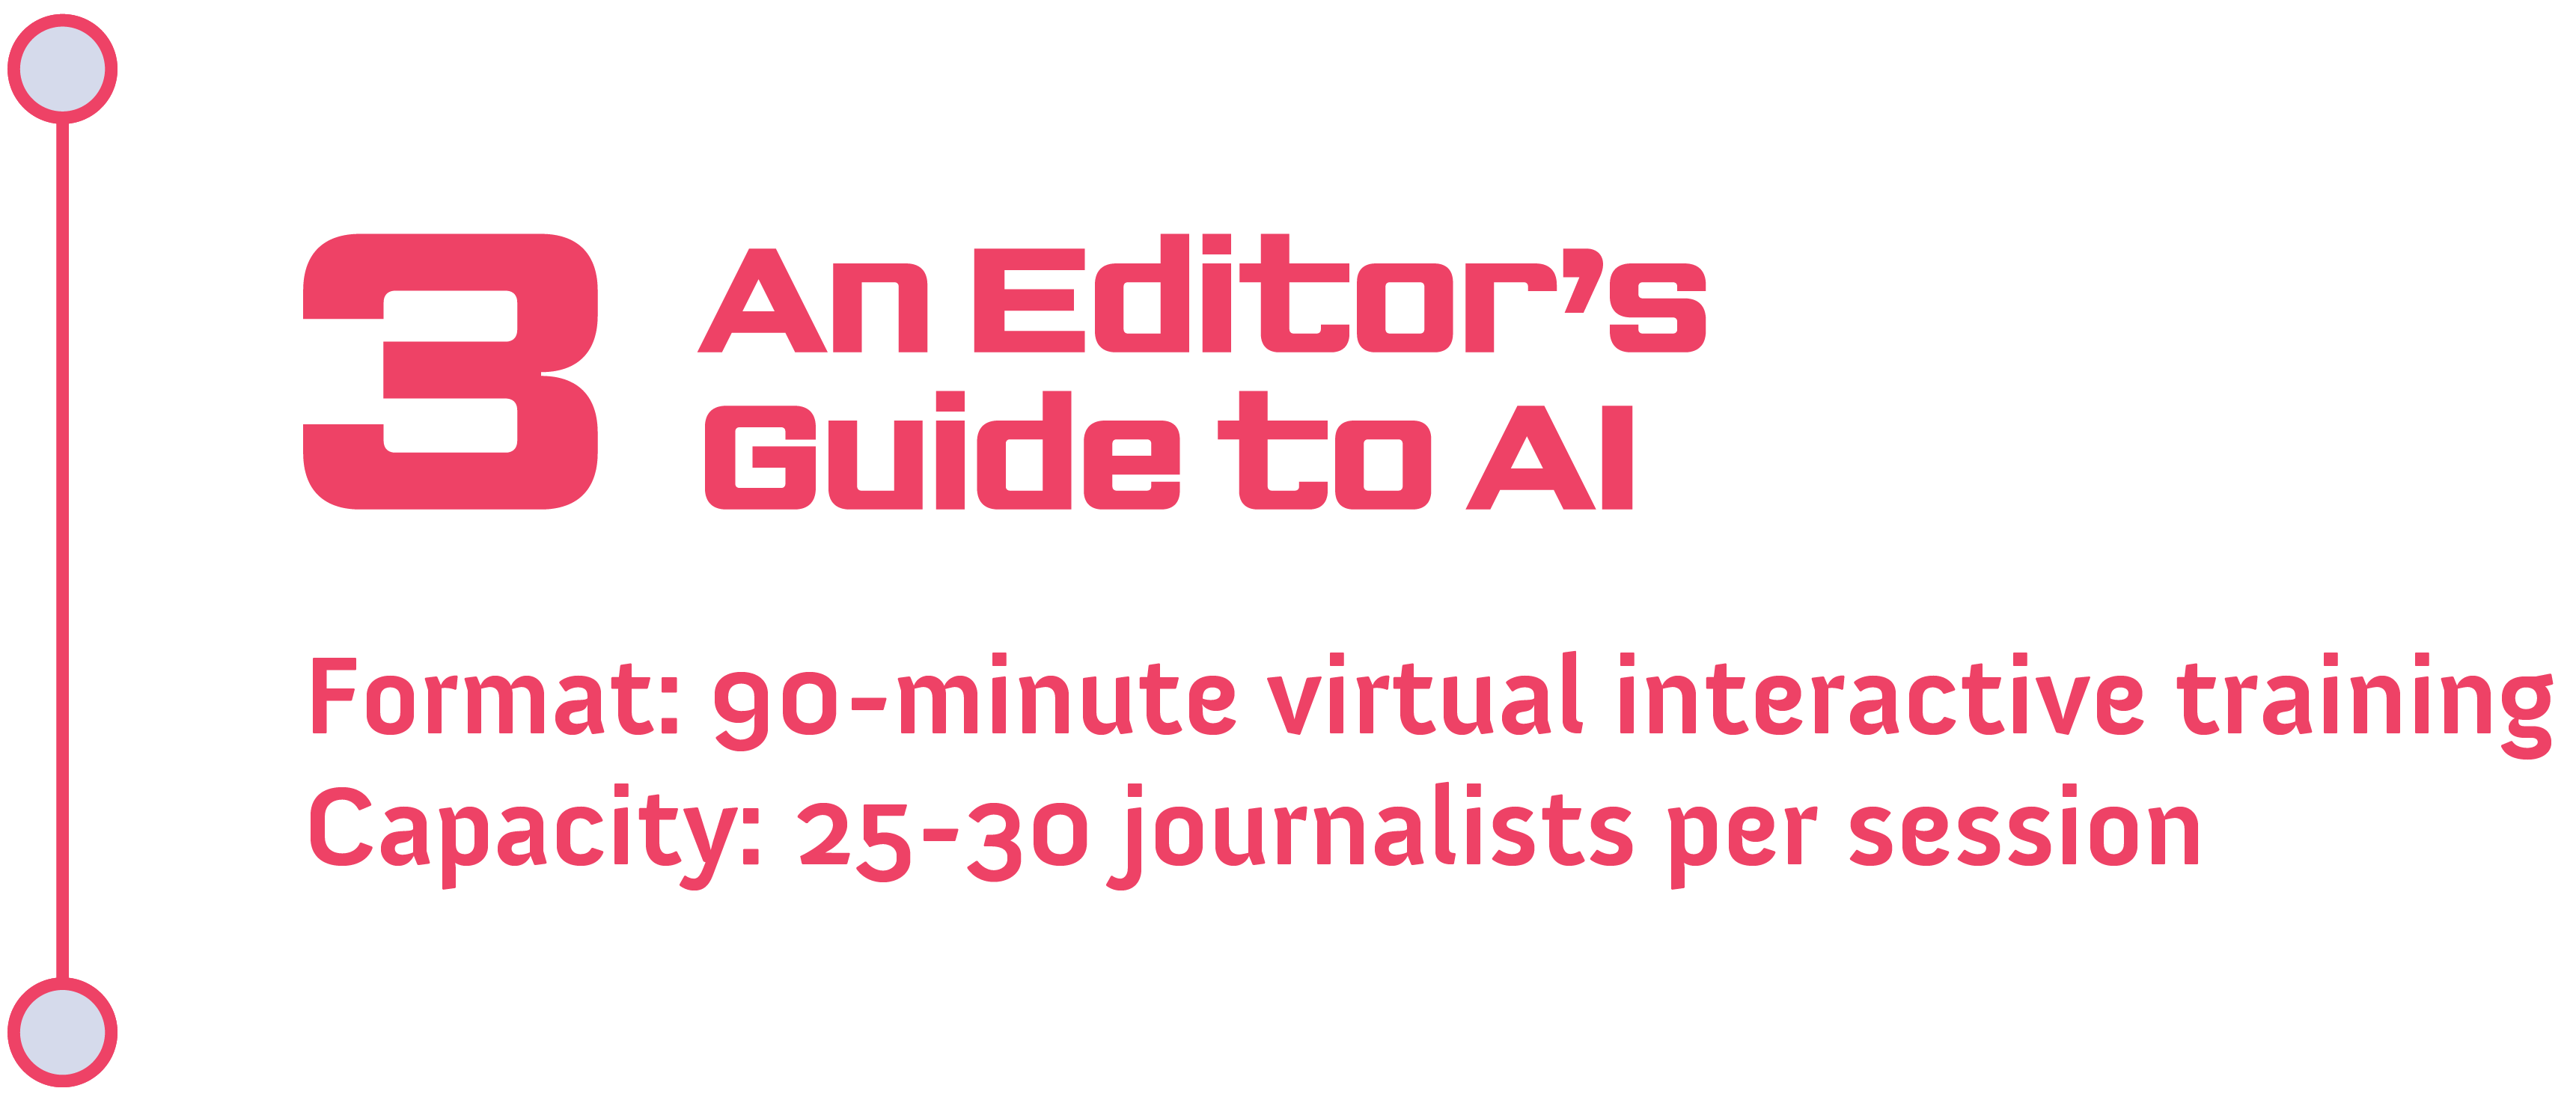 Track 3: An Editor's Guide to AI<br />
Format: 90-minute virtual interactive training<br />
Capacity: 25-30 journalists per session